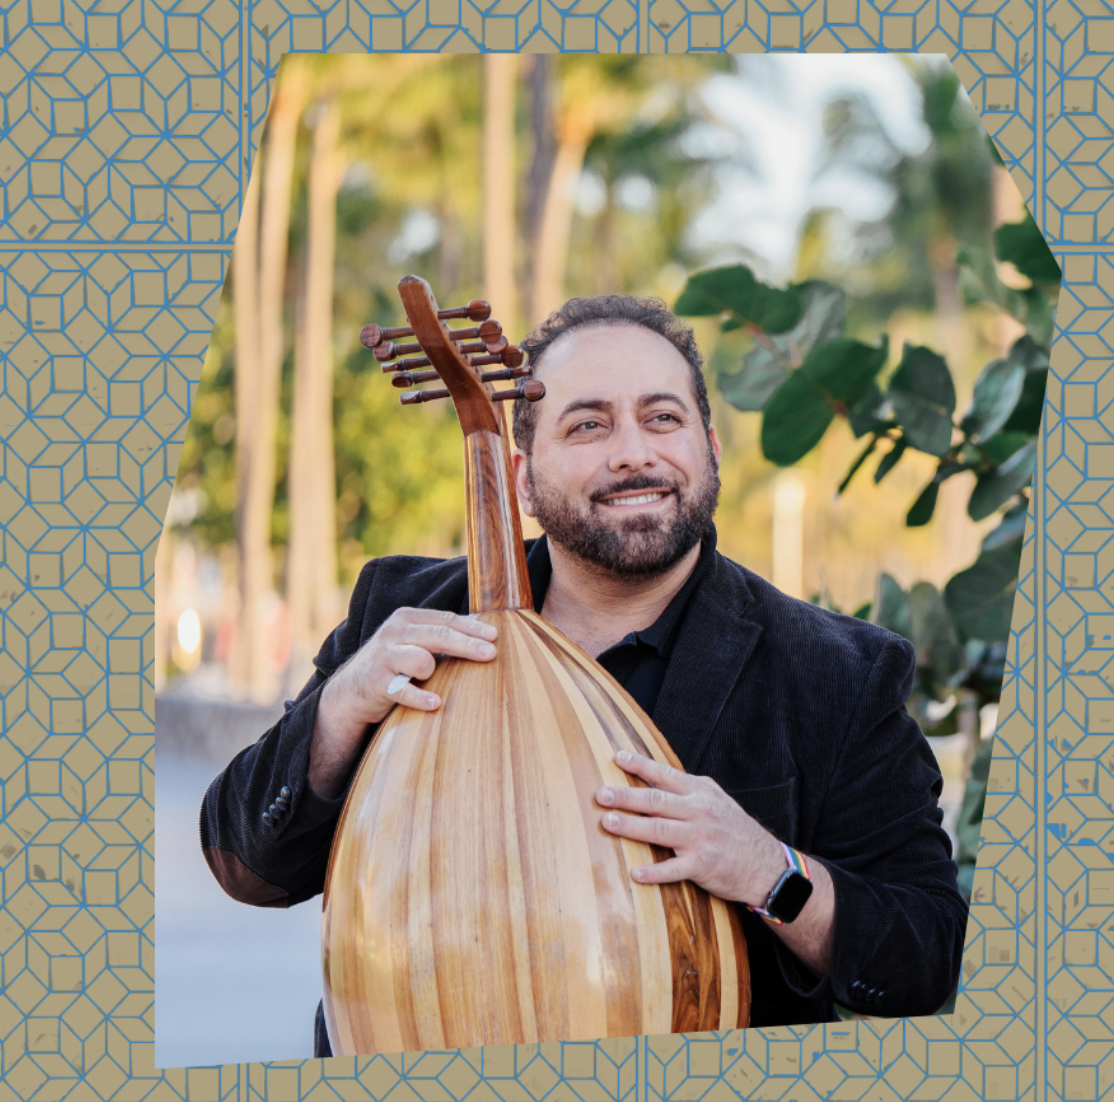 Oud: Arabic Culture, Music and History